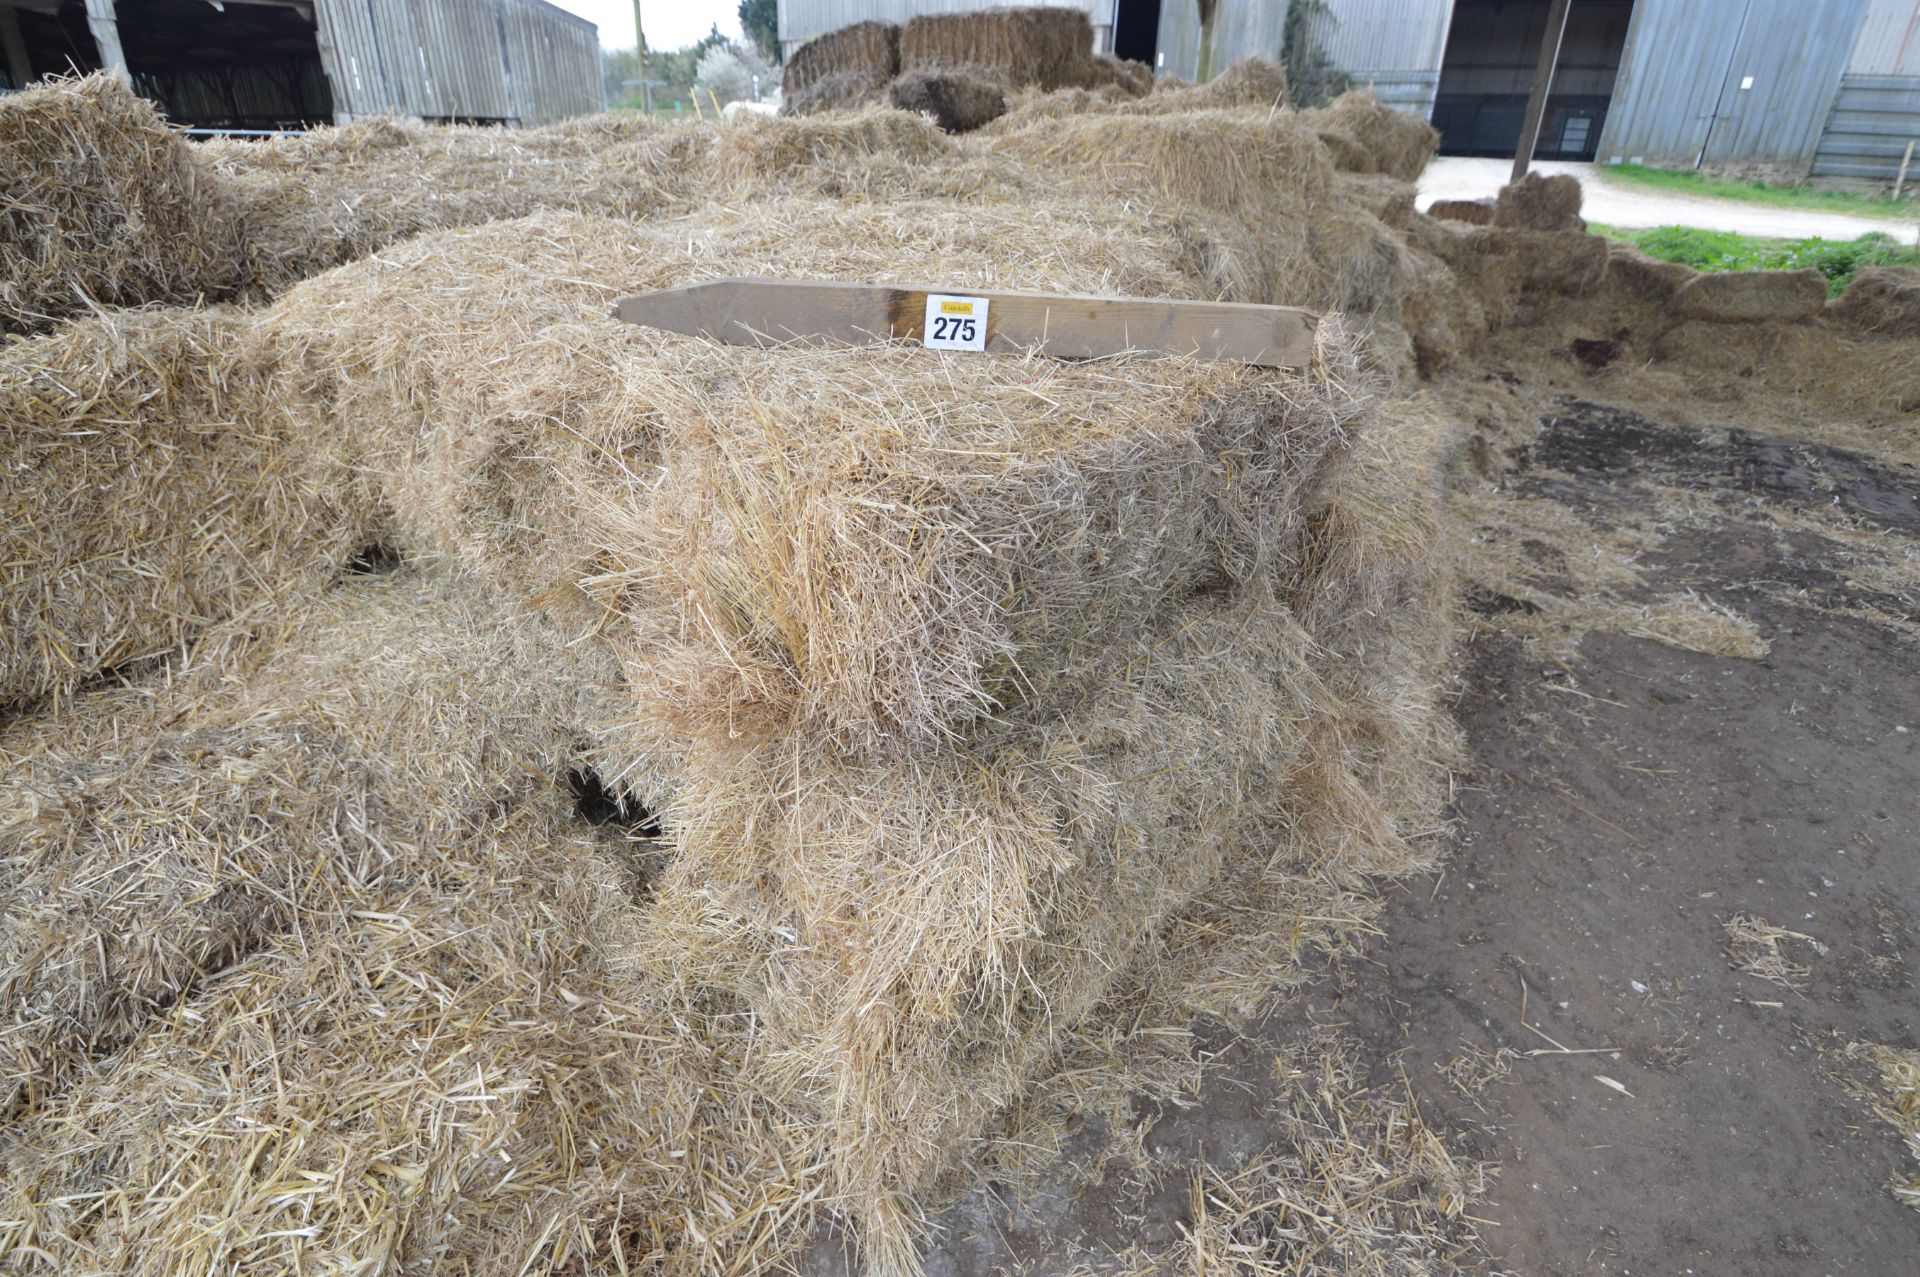 APPROX 60 BALES OF HAY